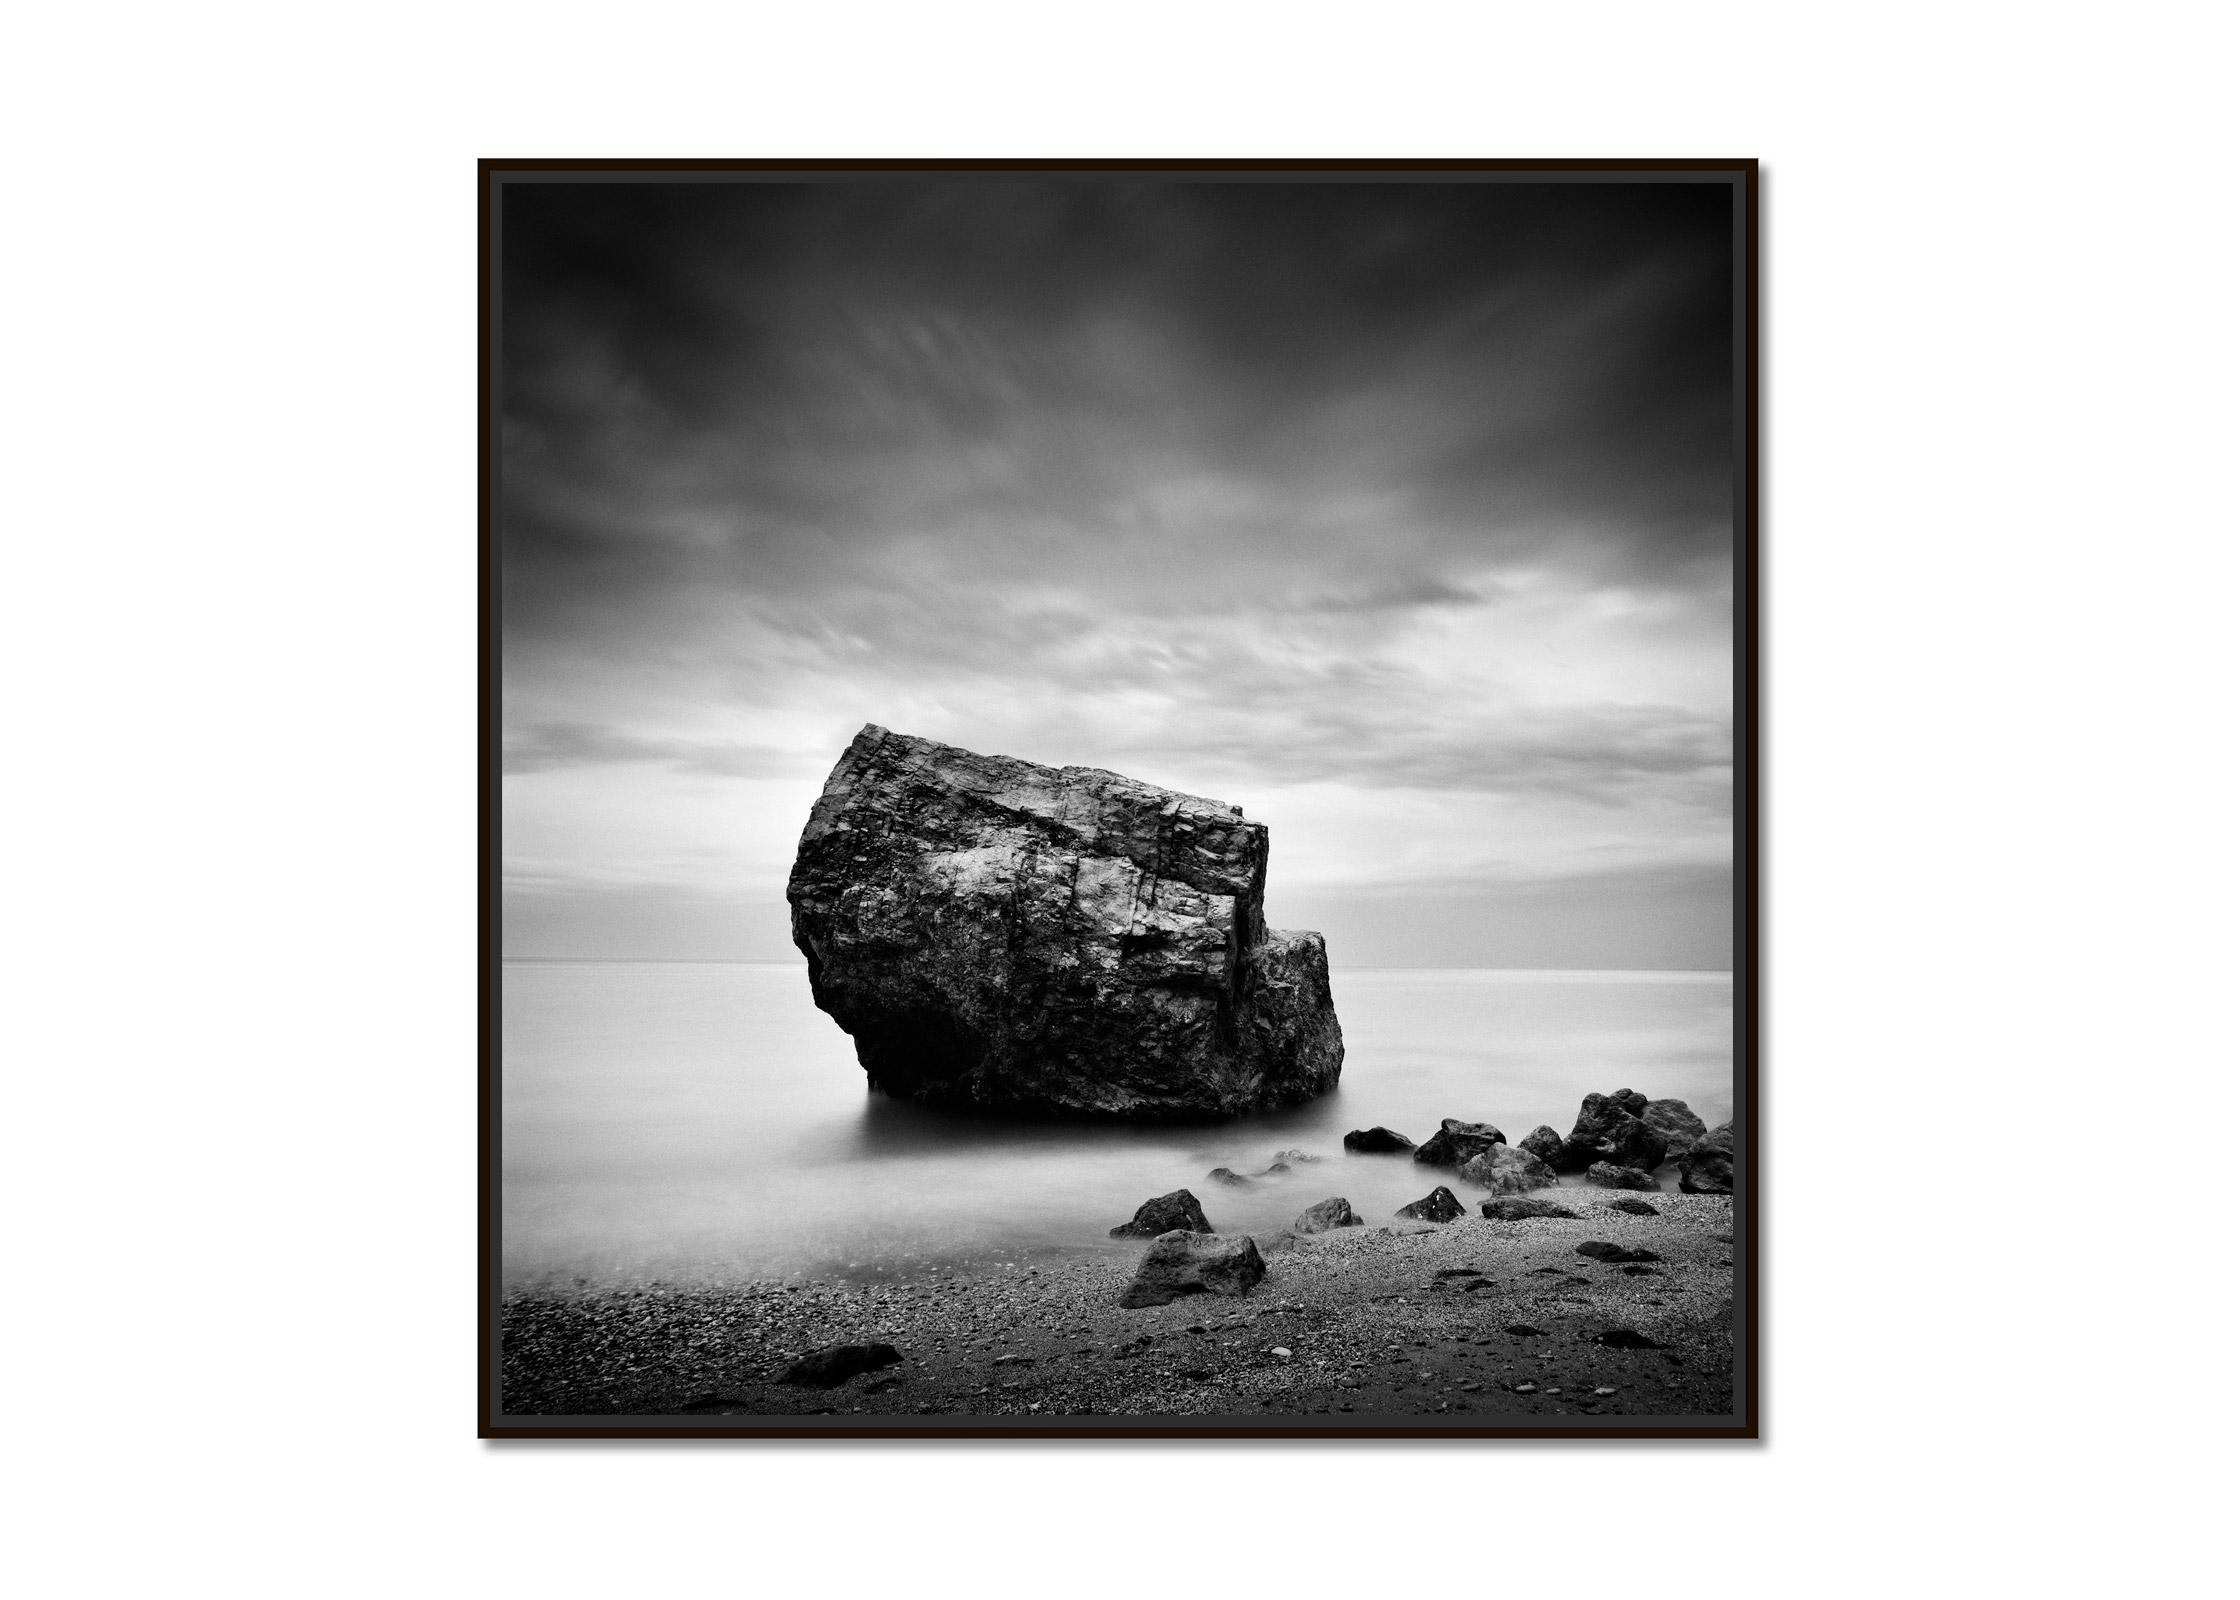 Great Rock, Beach, Spain, black and white fine art photography, landscape - Photograph by Gerald Berghammer